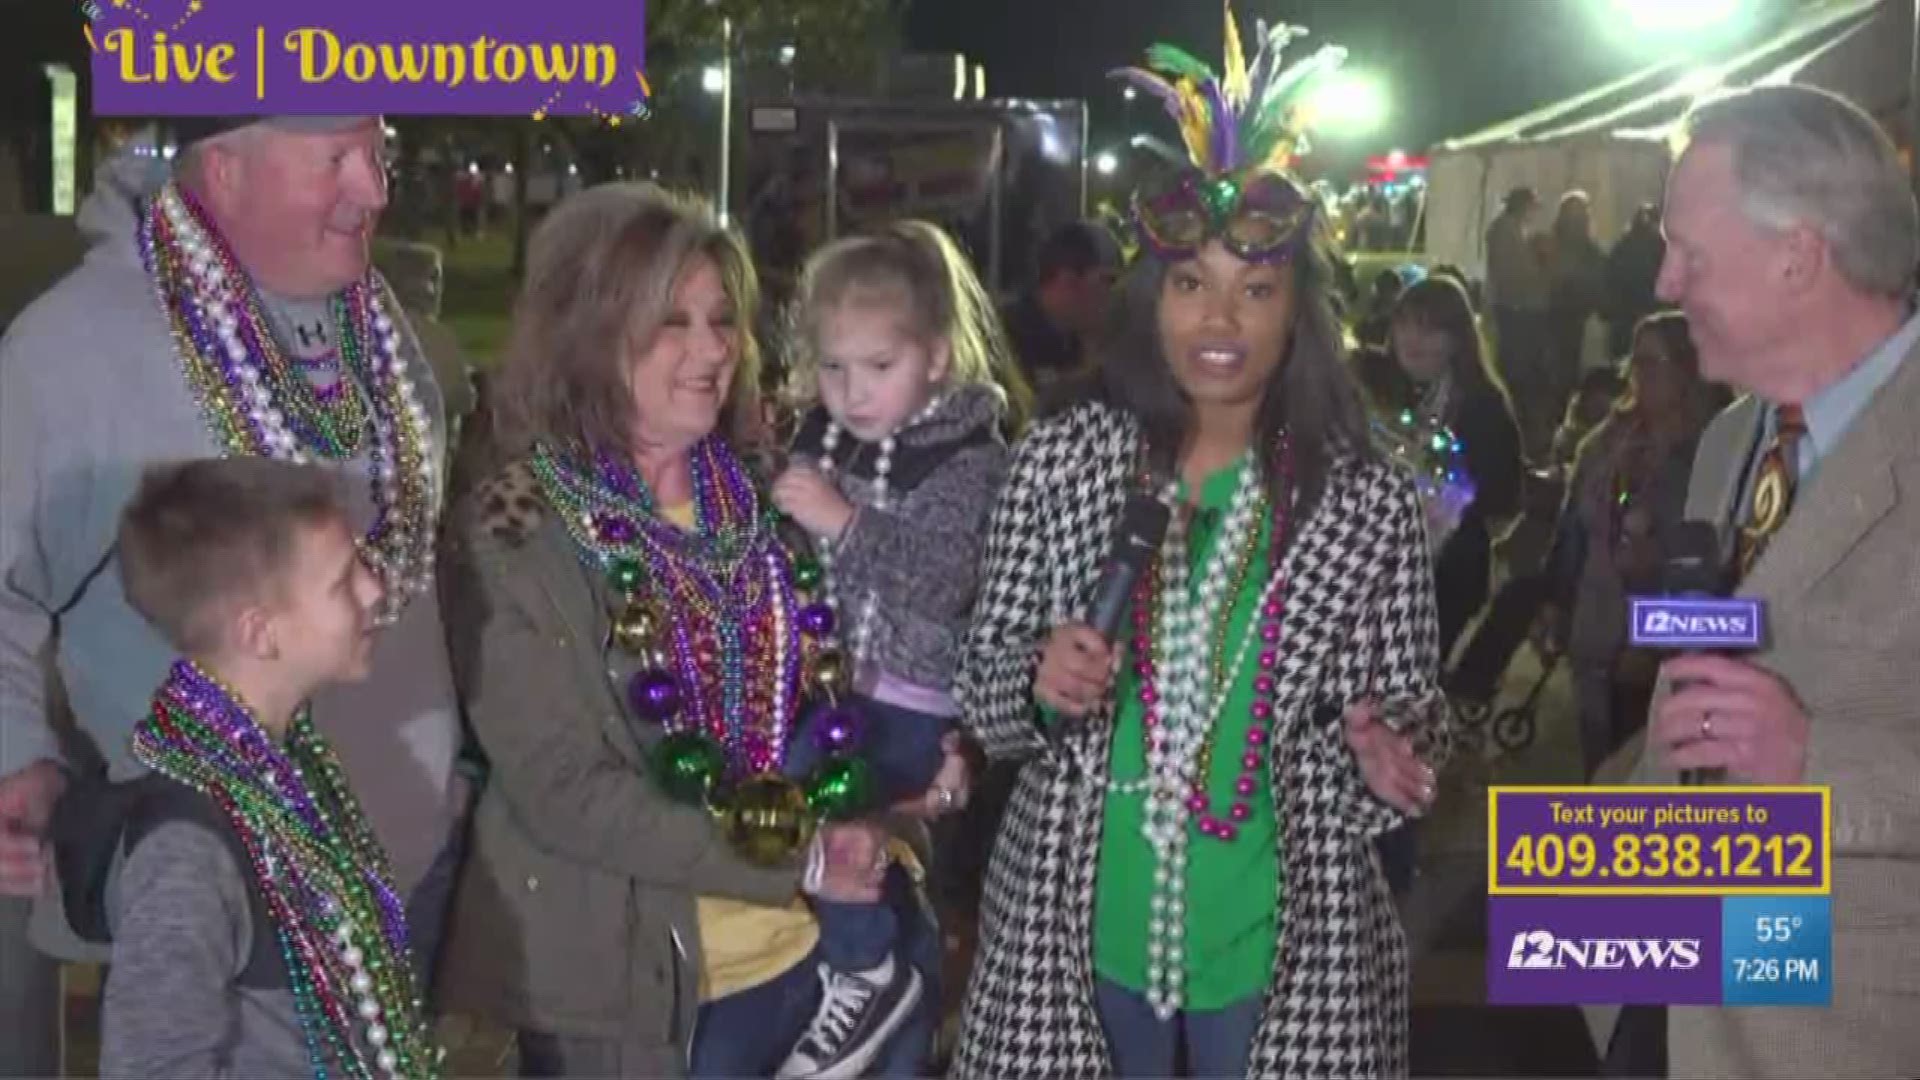 12News Rachel Keller and James Brown talked to a family who traveled from Livingston, Texas to come to Mardi Gras Southeast Texas.